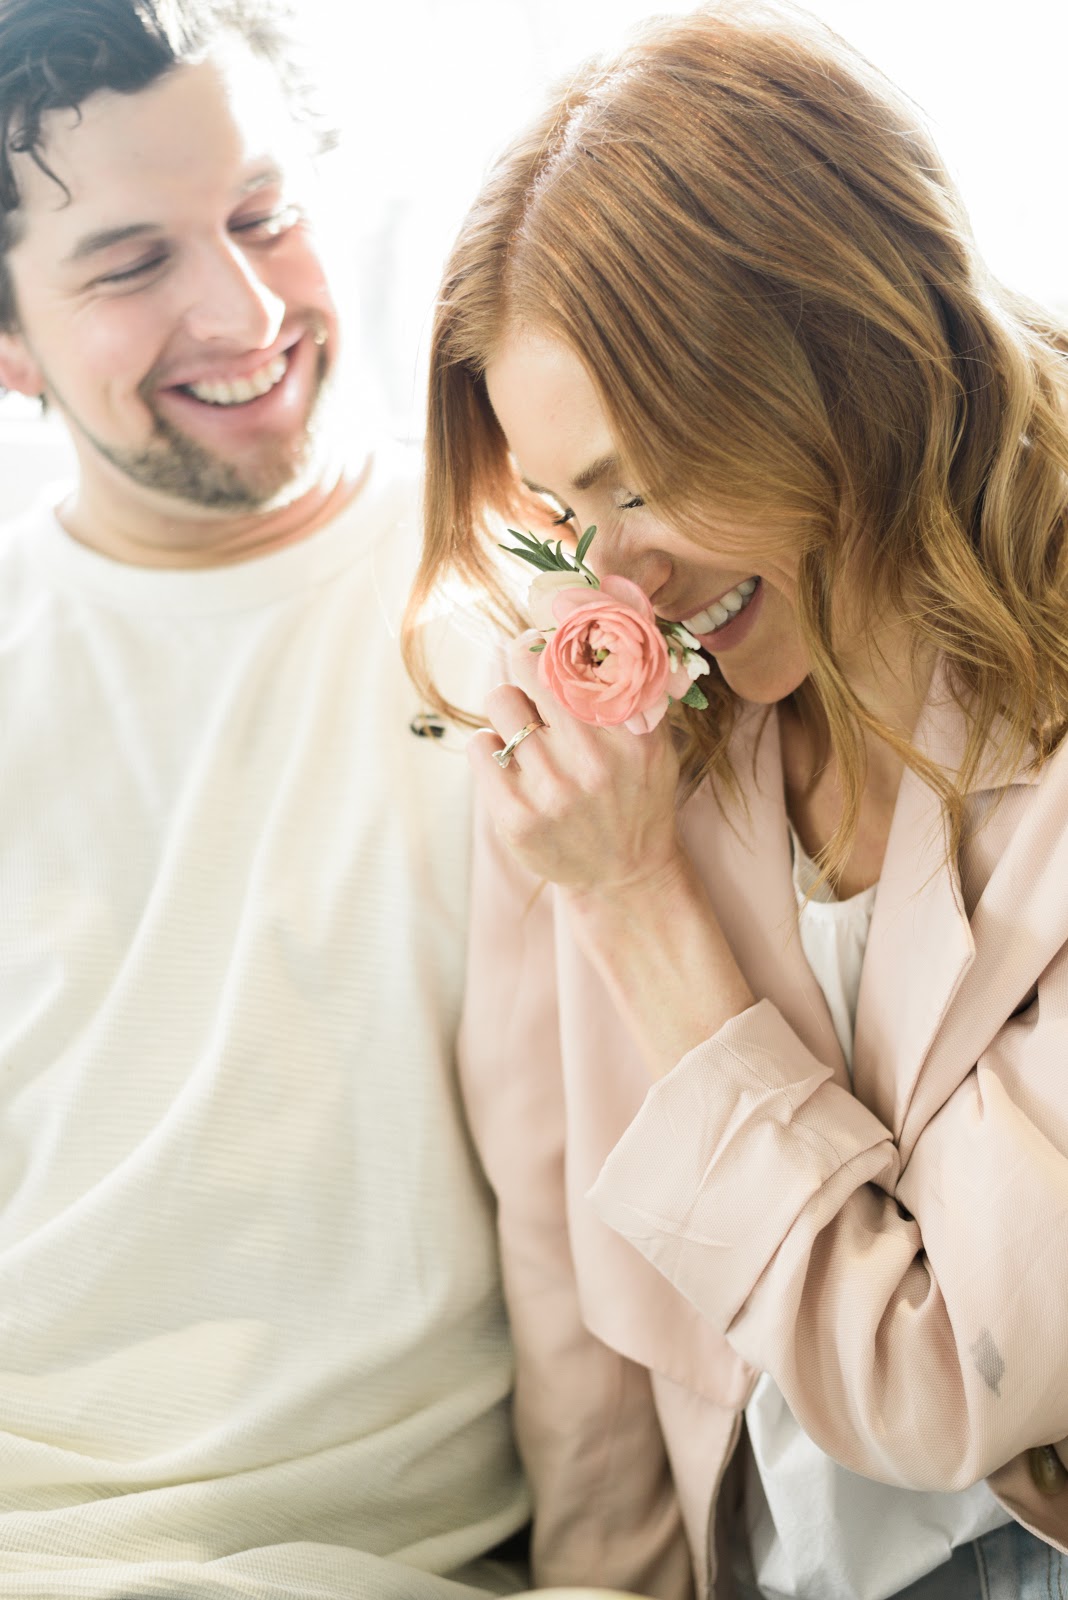 How to make the most out of your engagement; engagement shoot tips, engagement planning